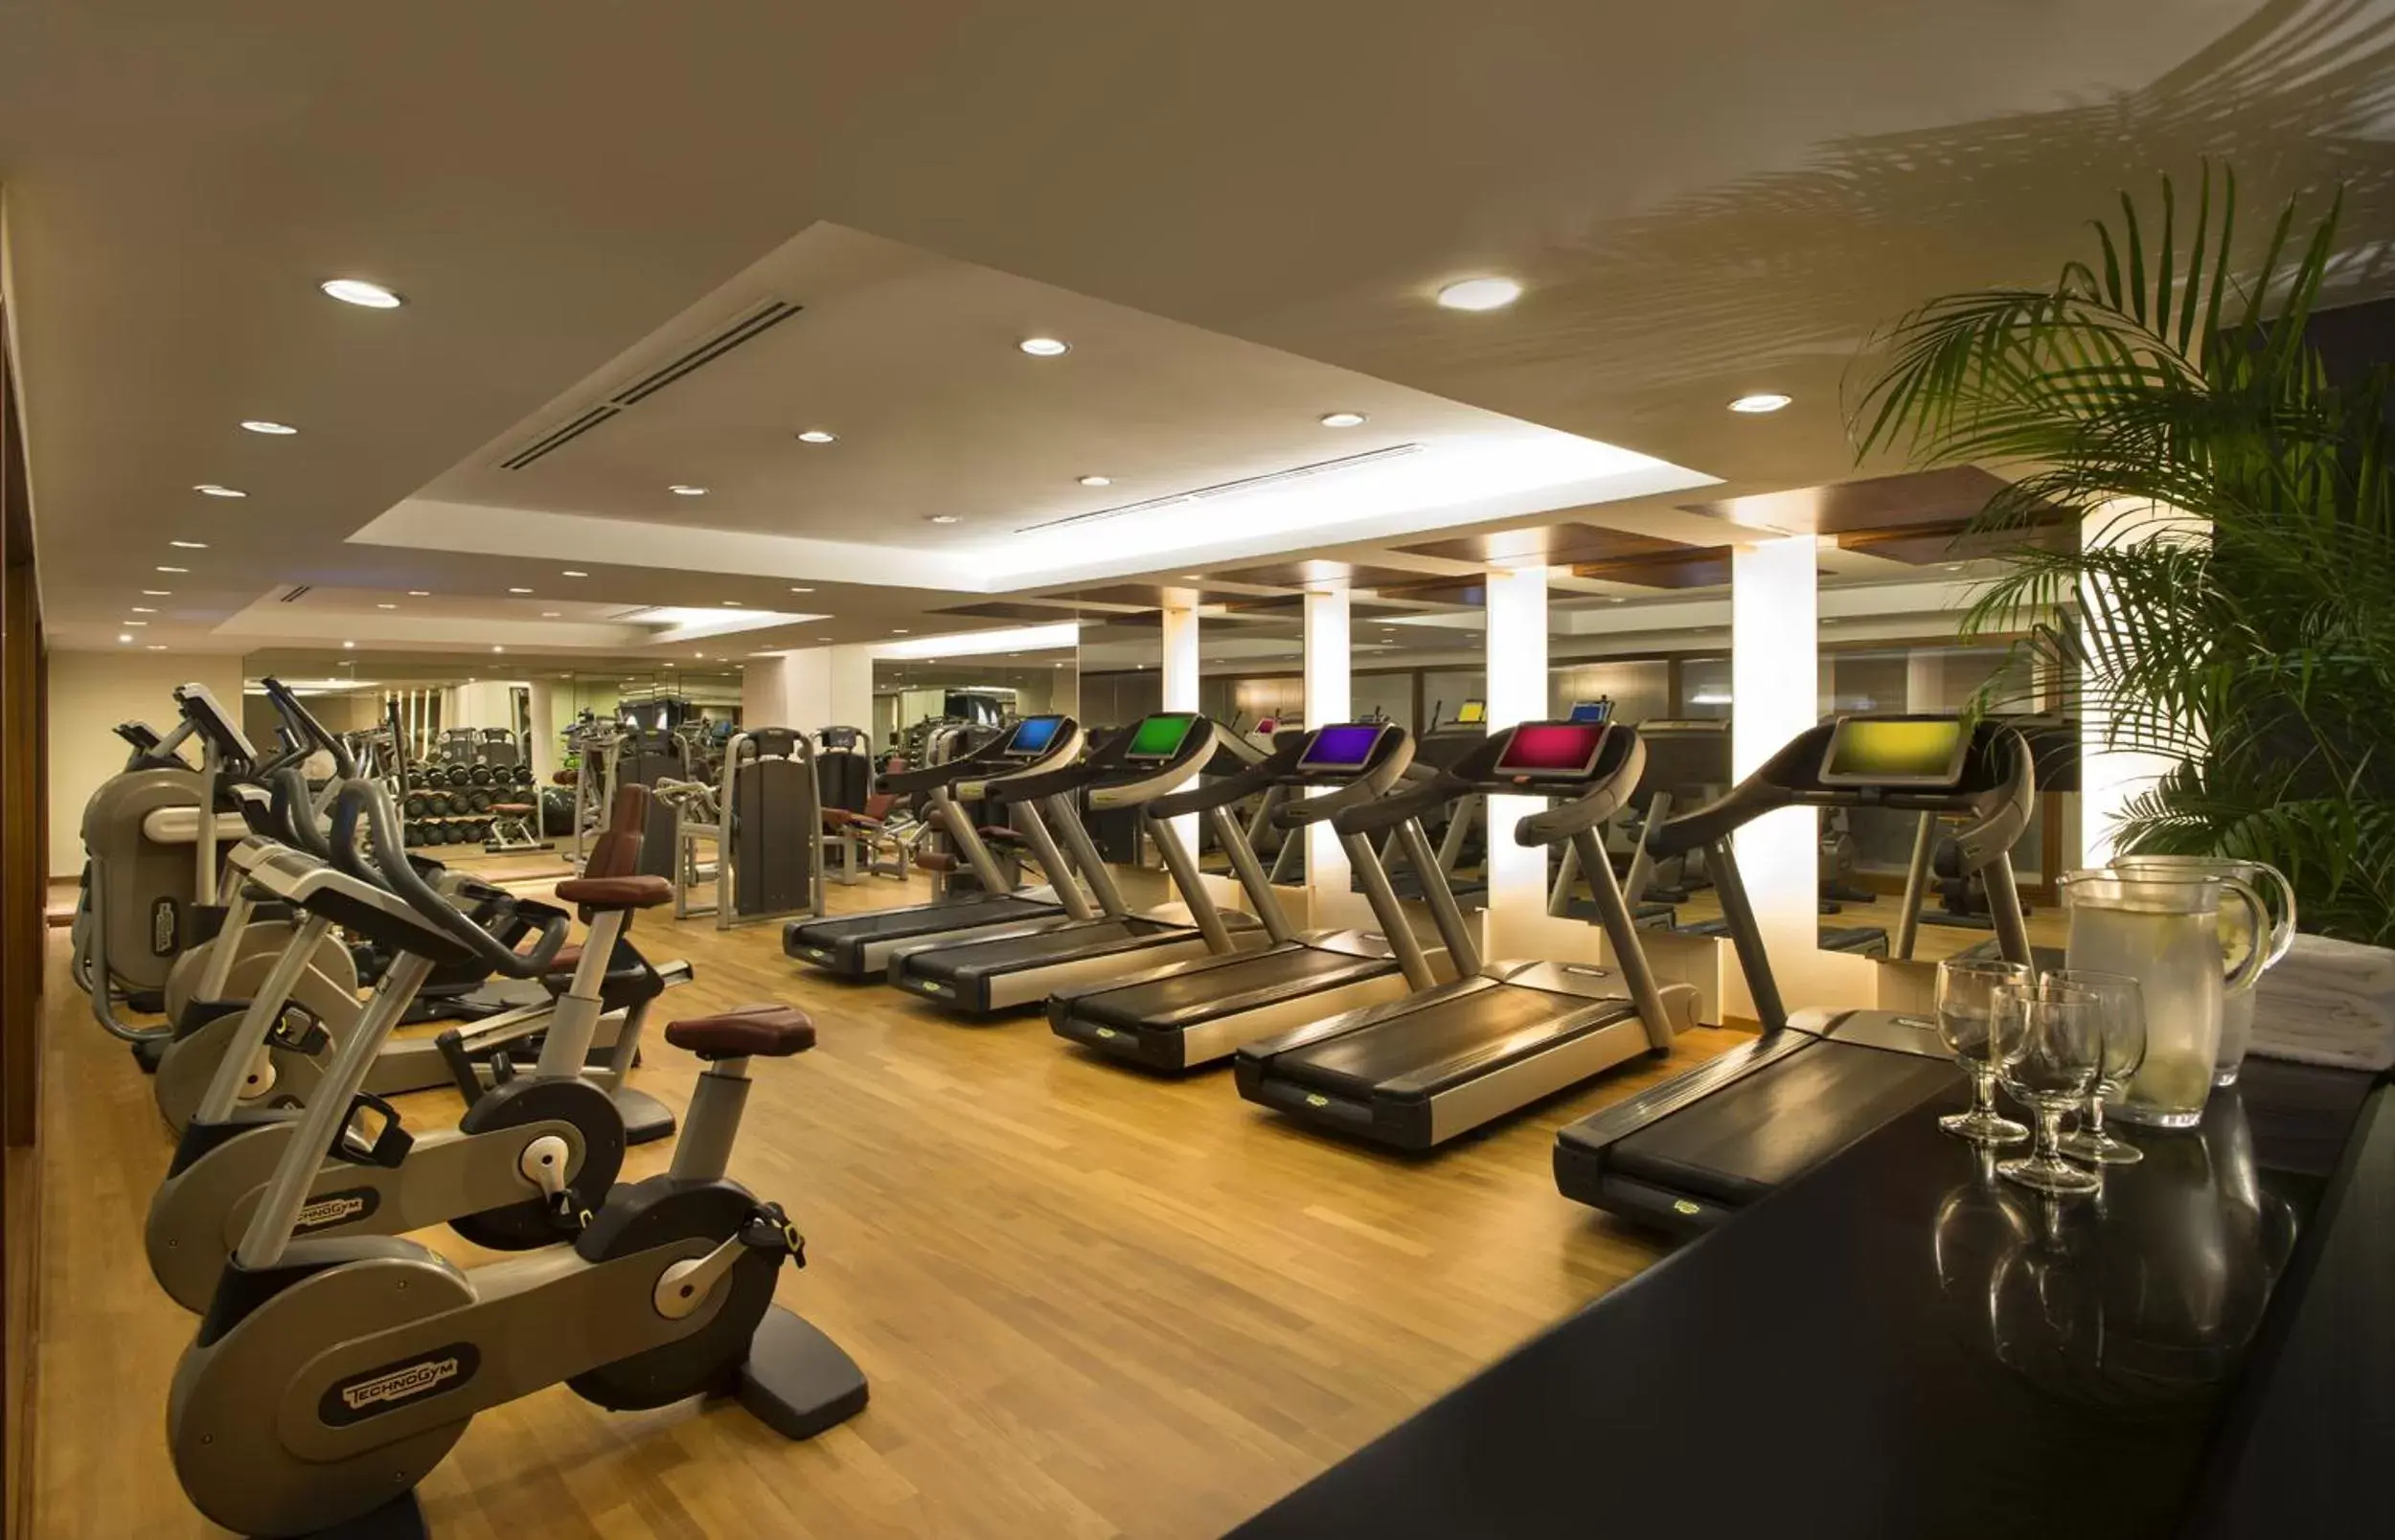 Fitness centre/facilities, Fitness Center/Facilities in The Fullerton Hotel Singapore